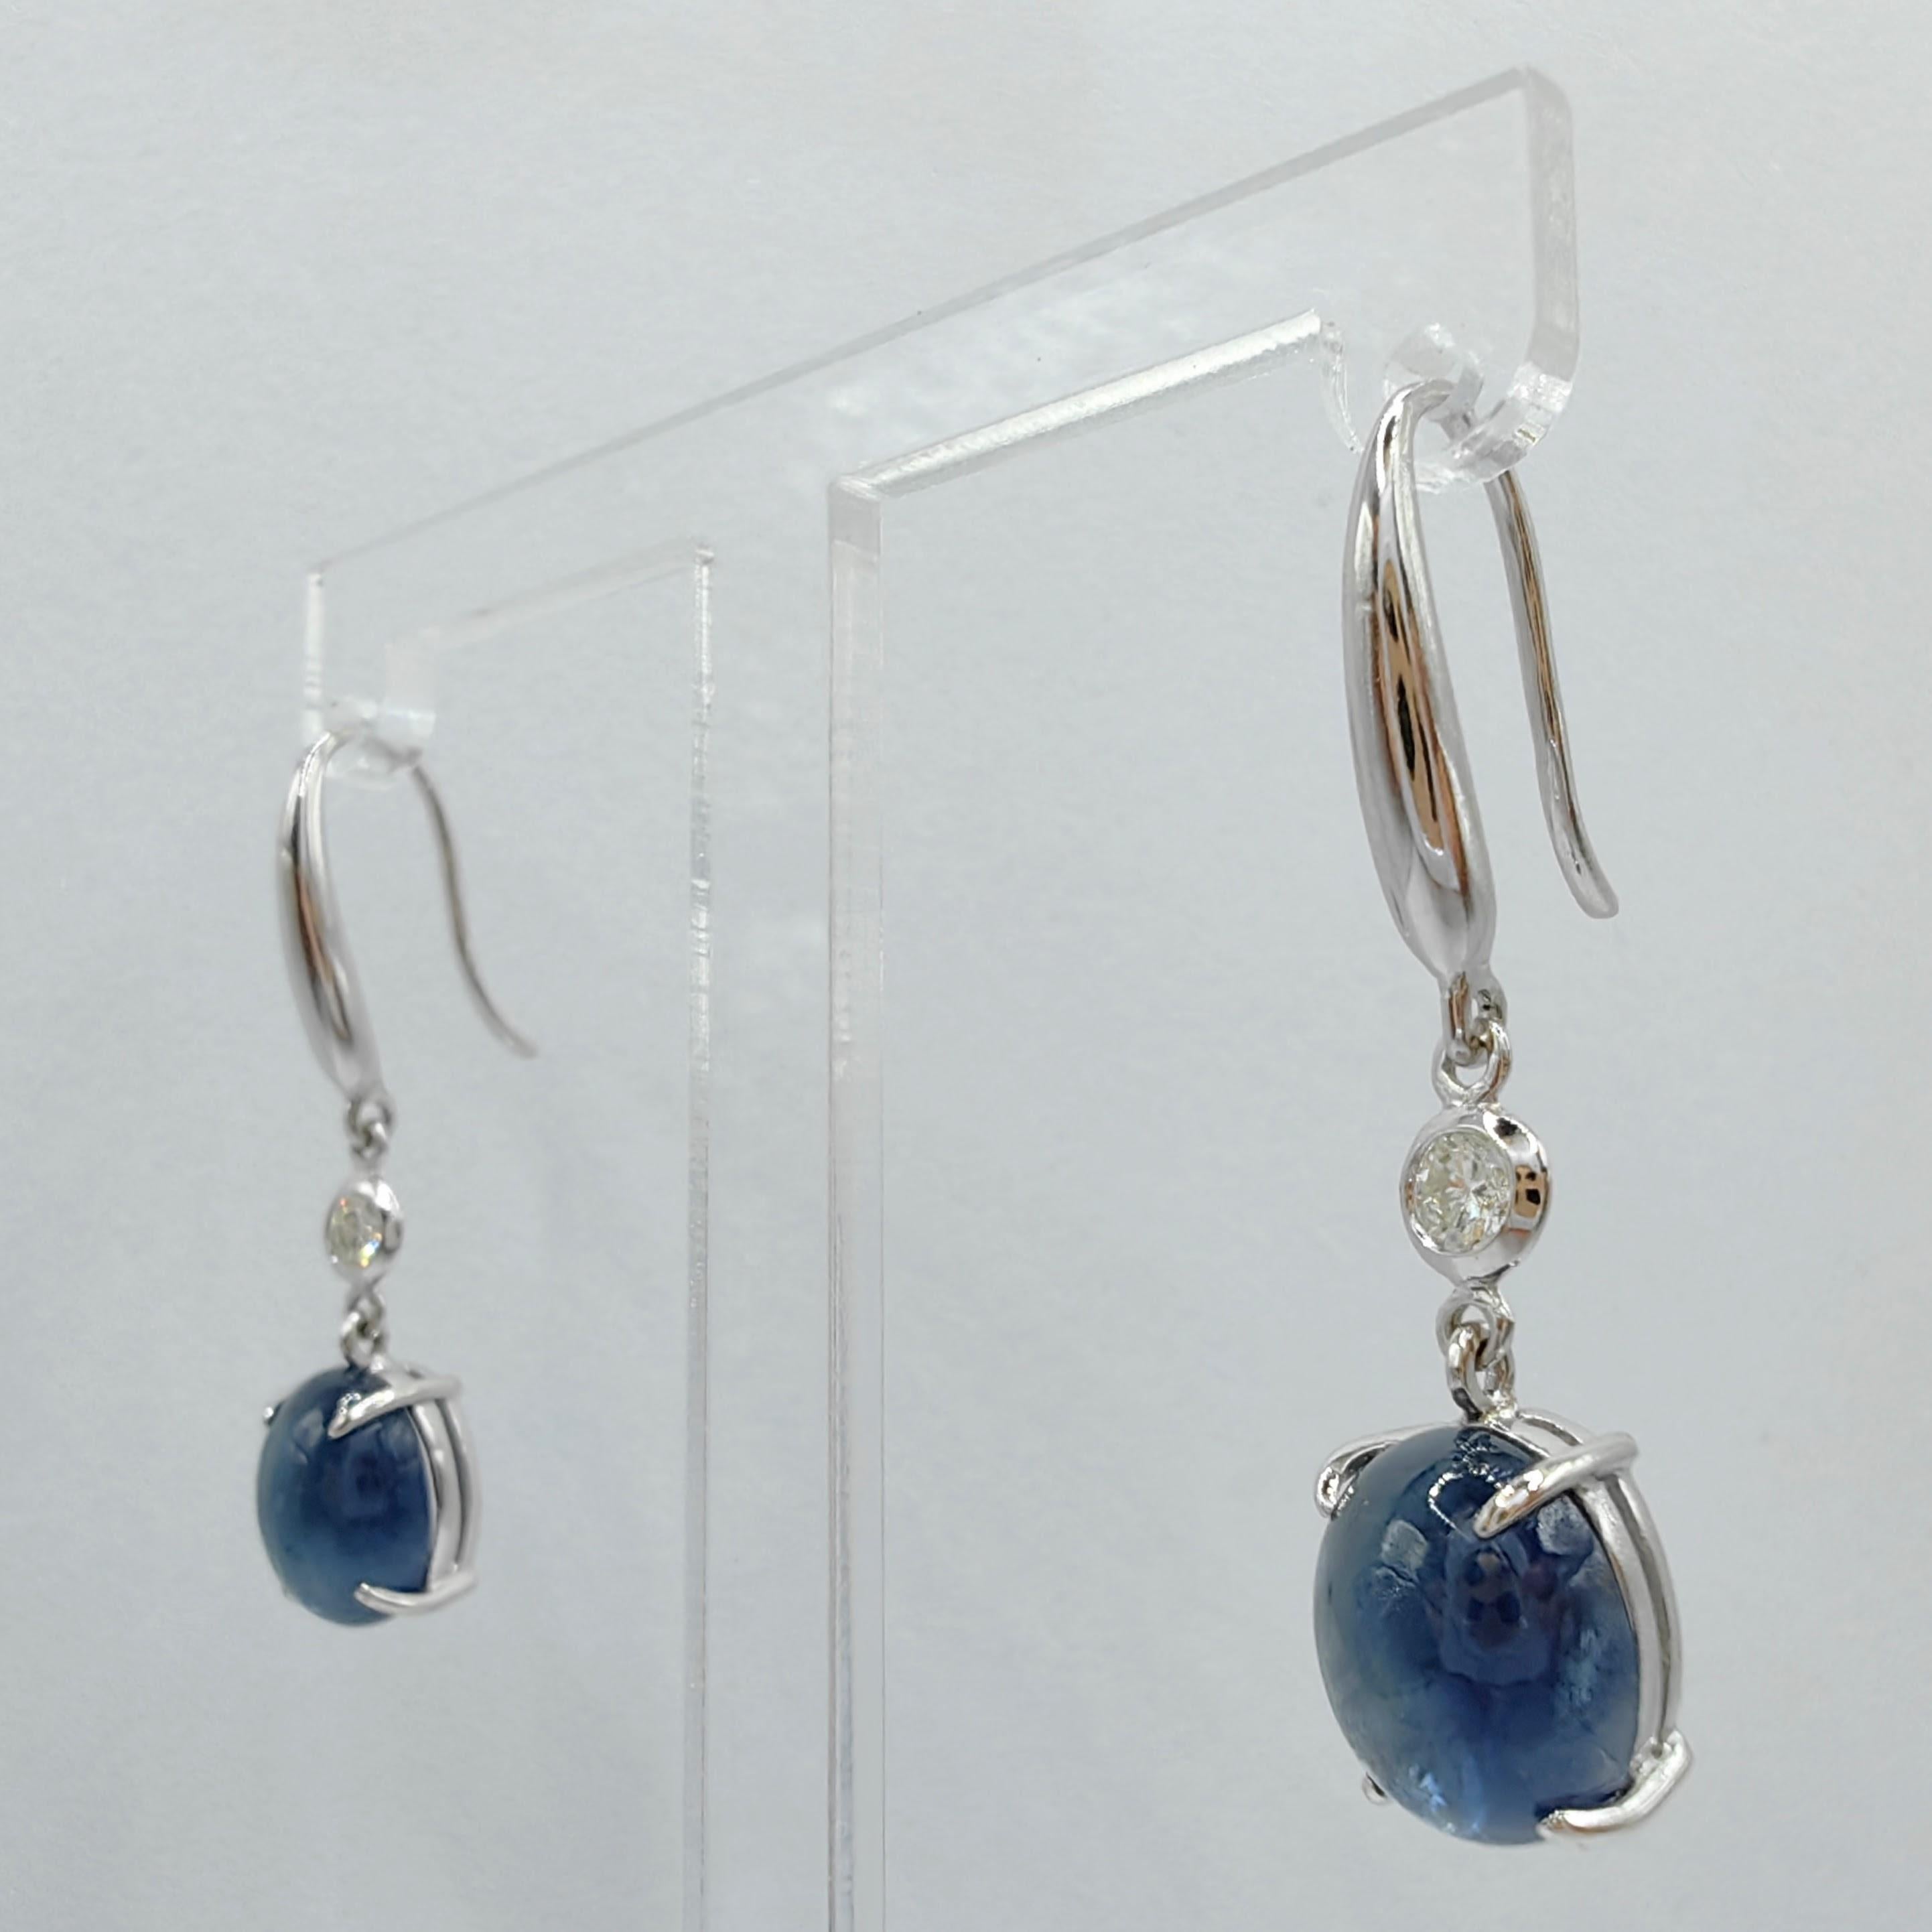 Contemporary 6.94ct Cabochon Blue Sapphire Diamond Dangling Earrings in 18K White Gold For Sale